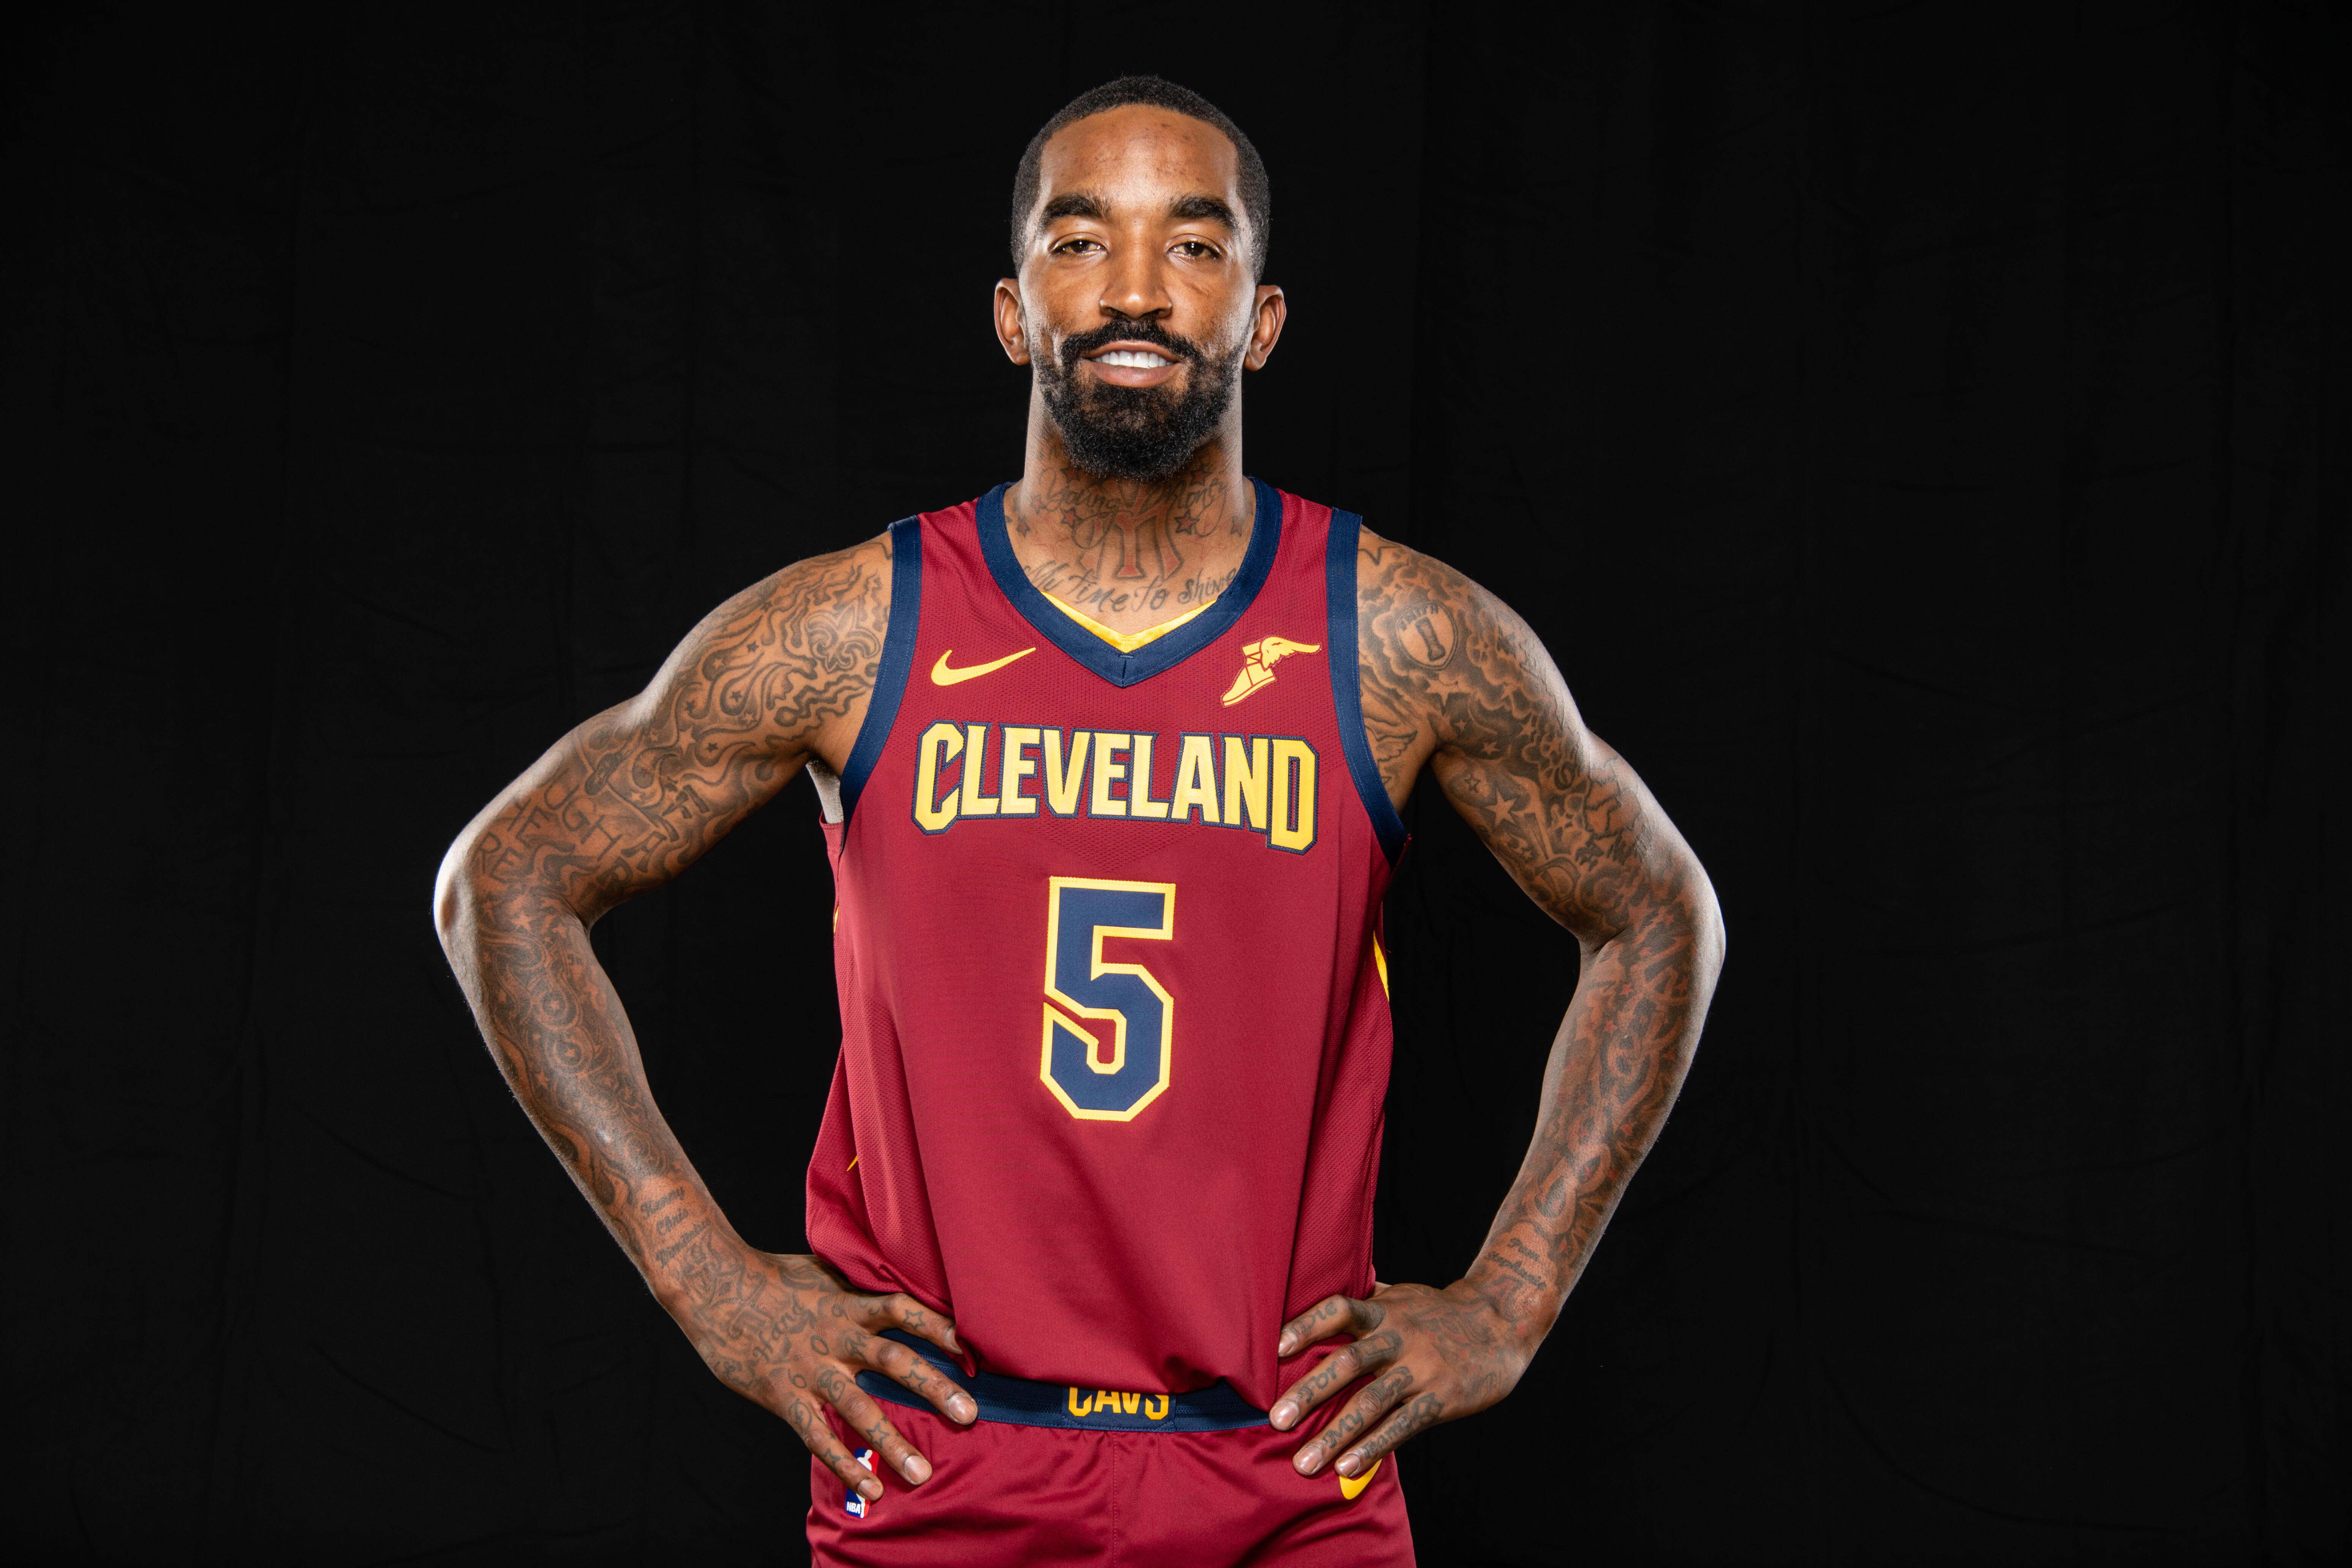 JR Smith Responds To Being Put On Blast For Being A Cheater By His Wife! - Thumbnail Image